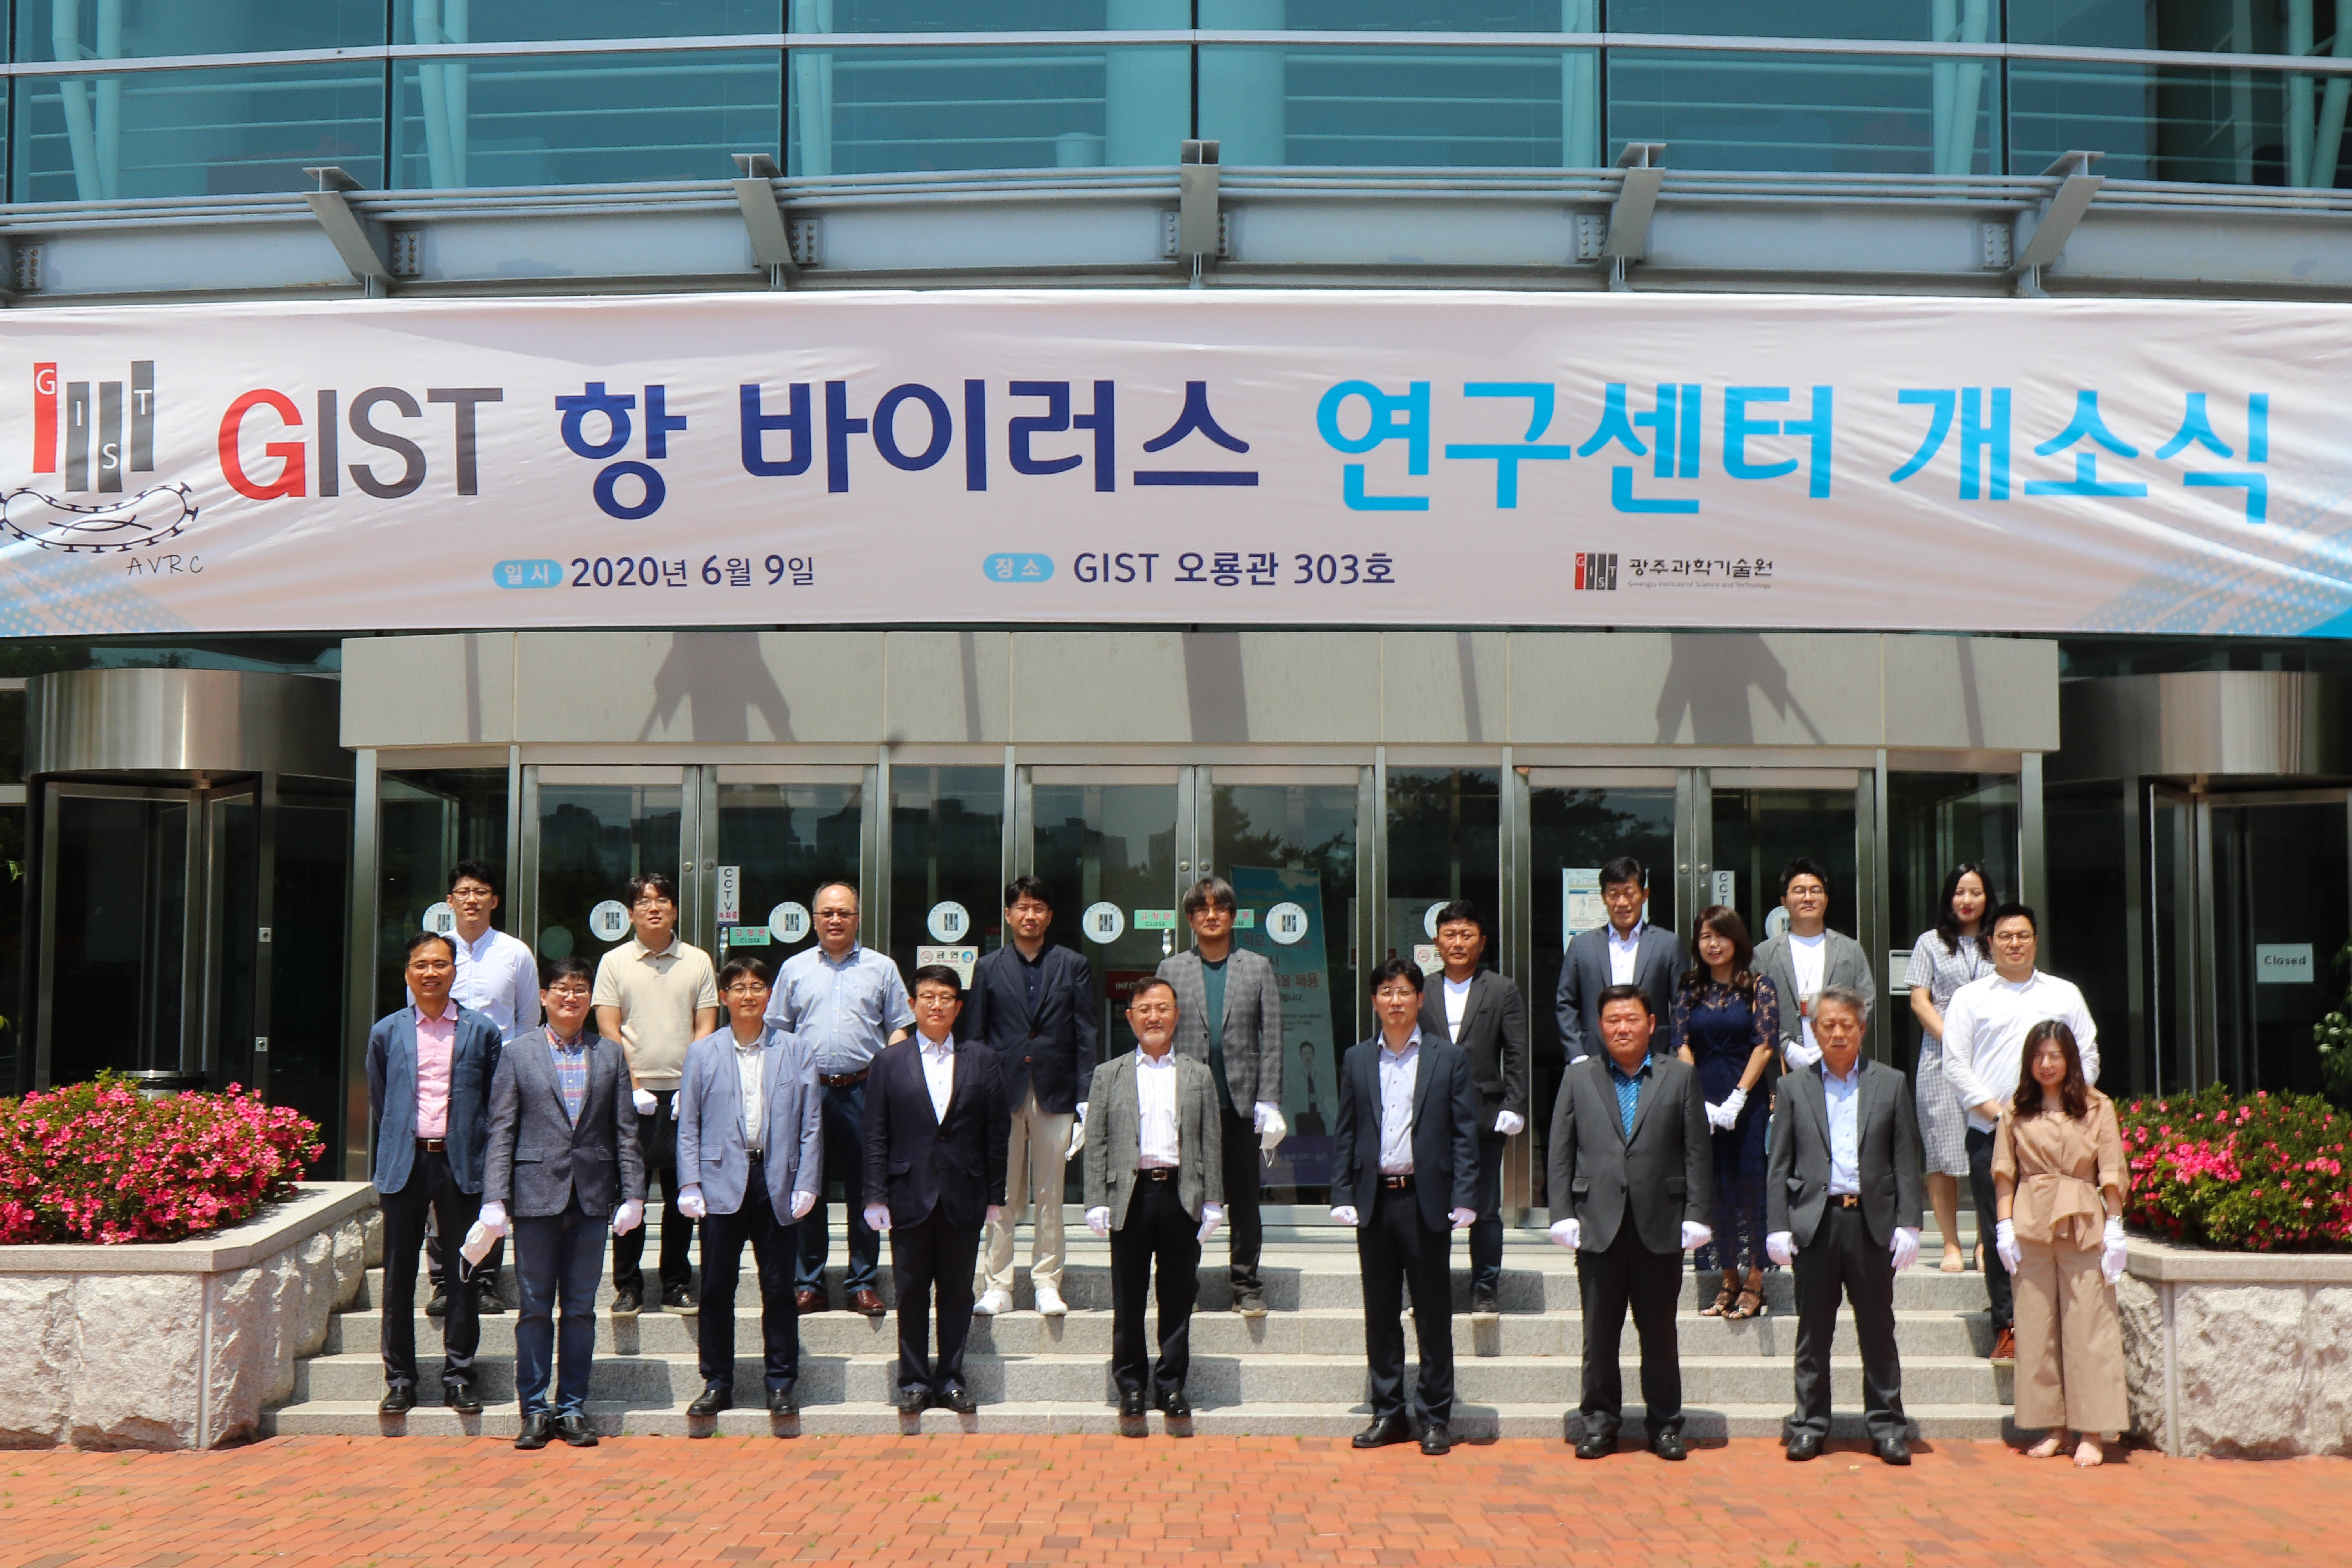 "GIST Anti-Virus Research Center" established to actively respond to new viruses such as COVID-19 이미지